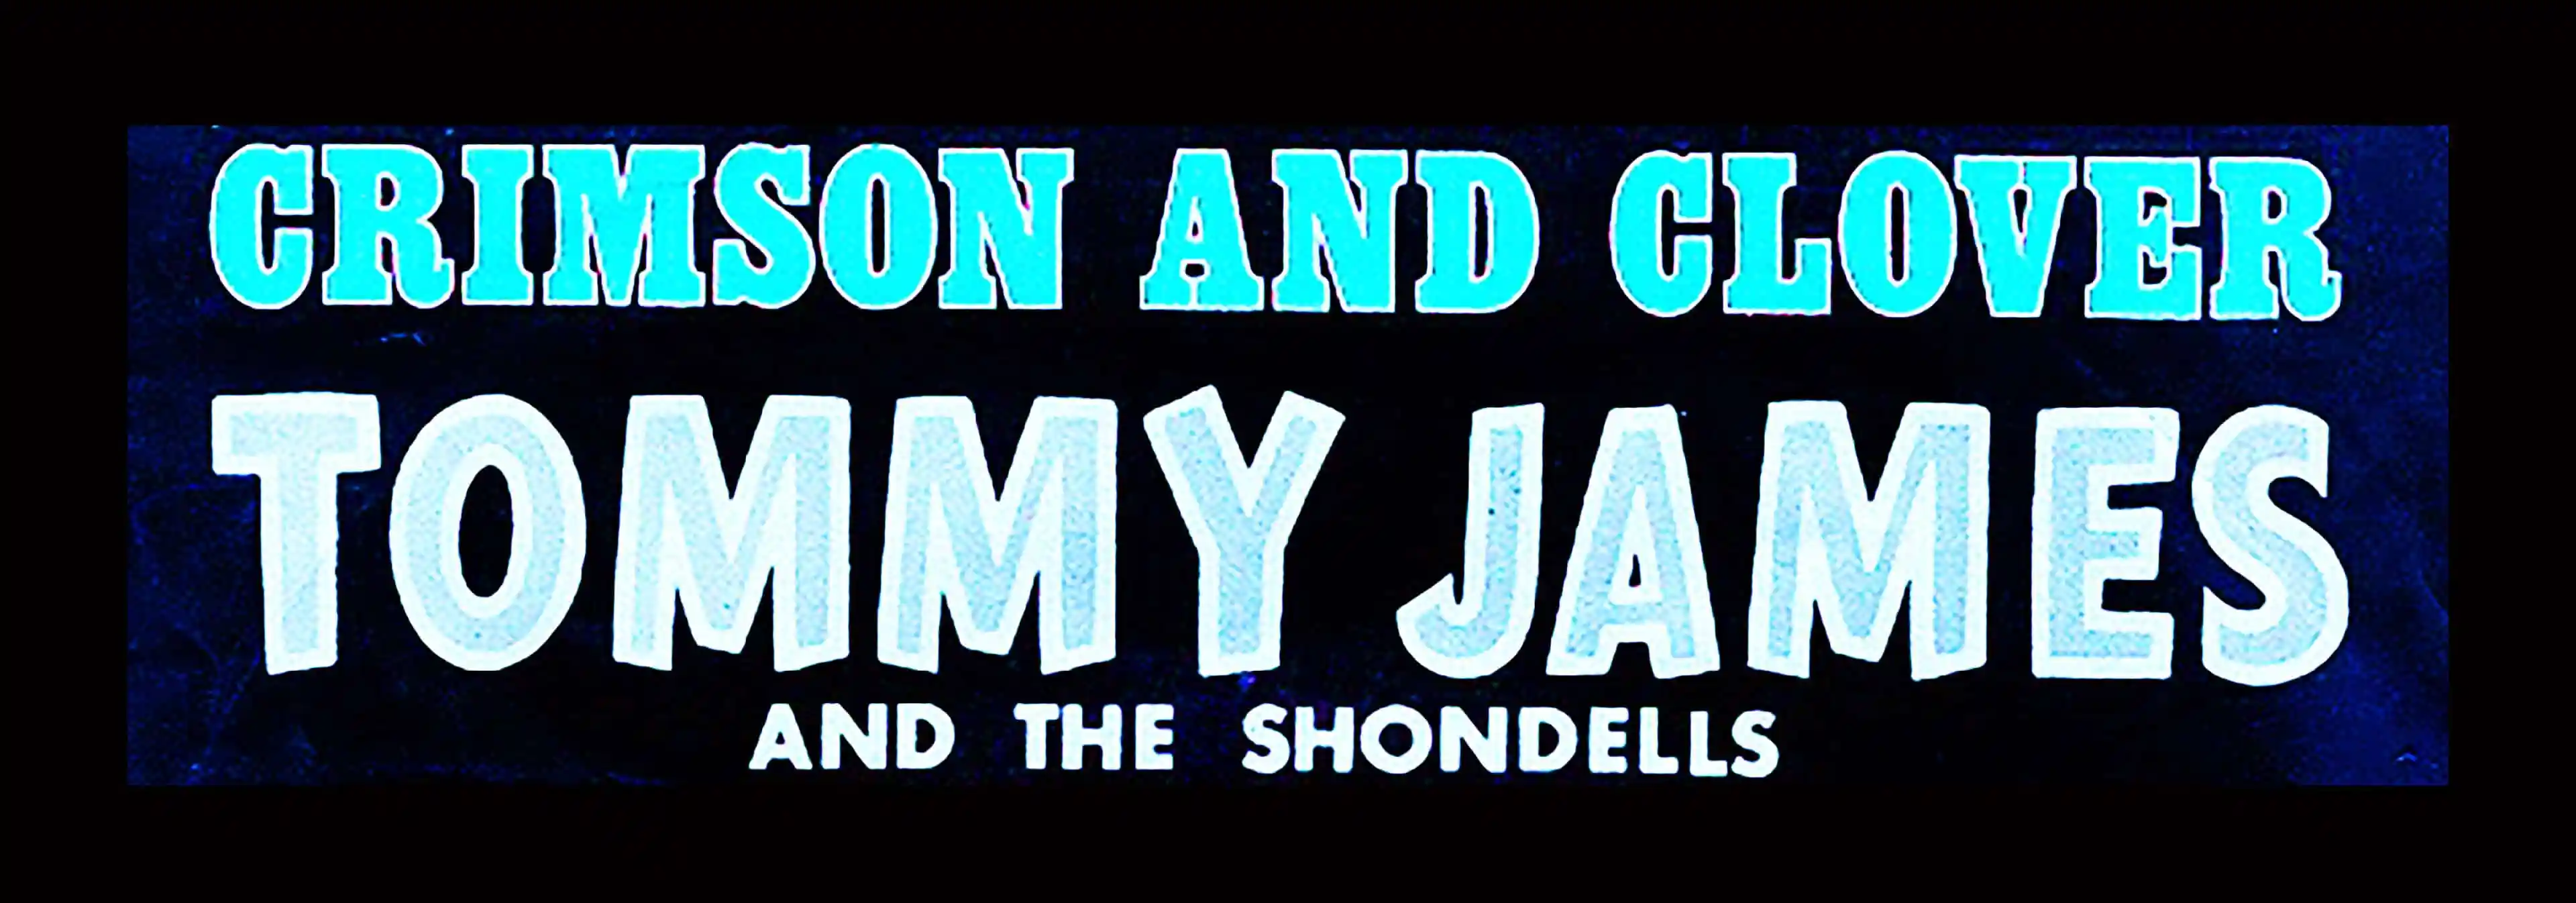 Behind The Song: “Crimson & Clover,” by Tommy James & The Shondells